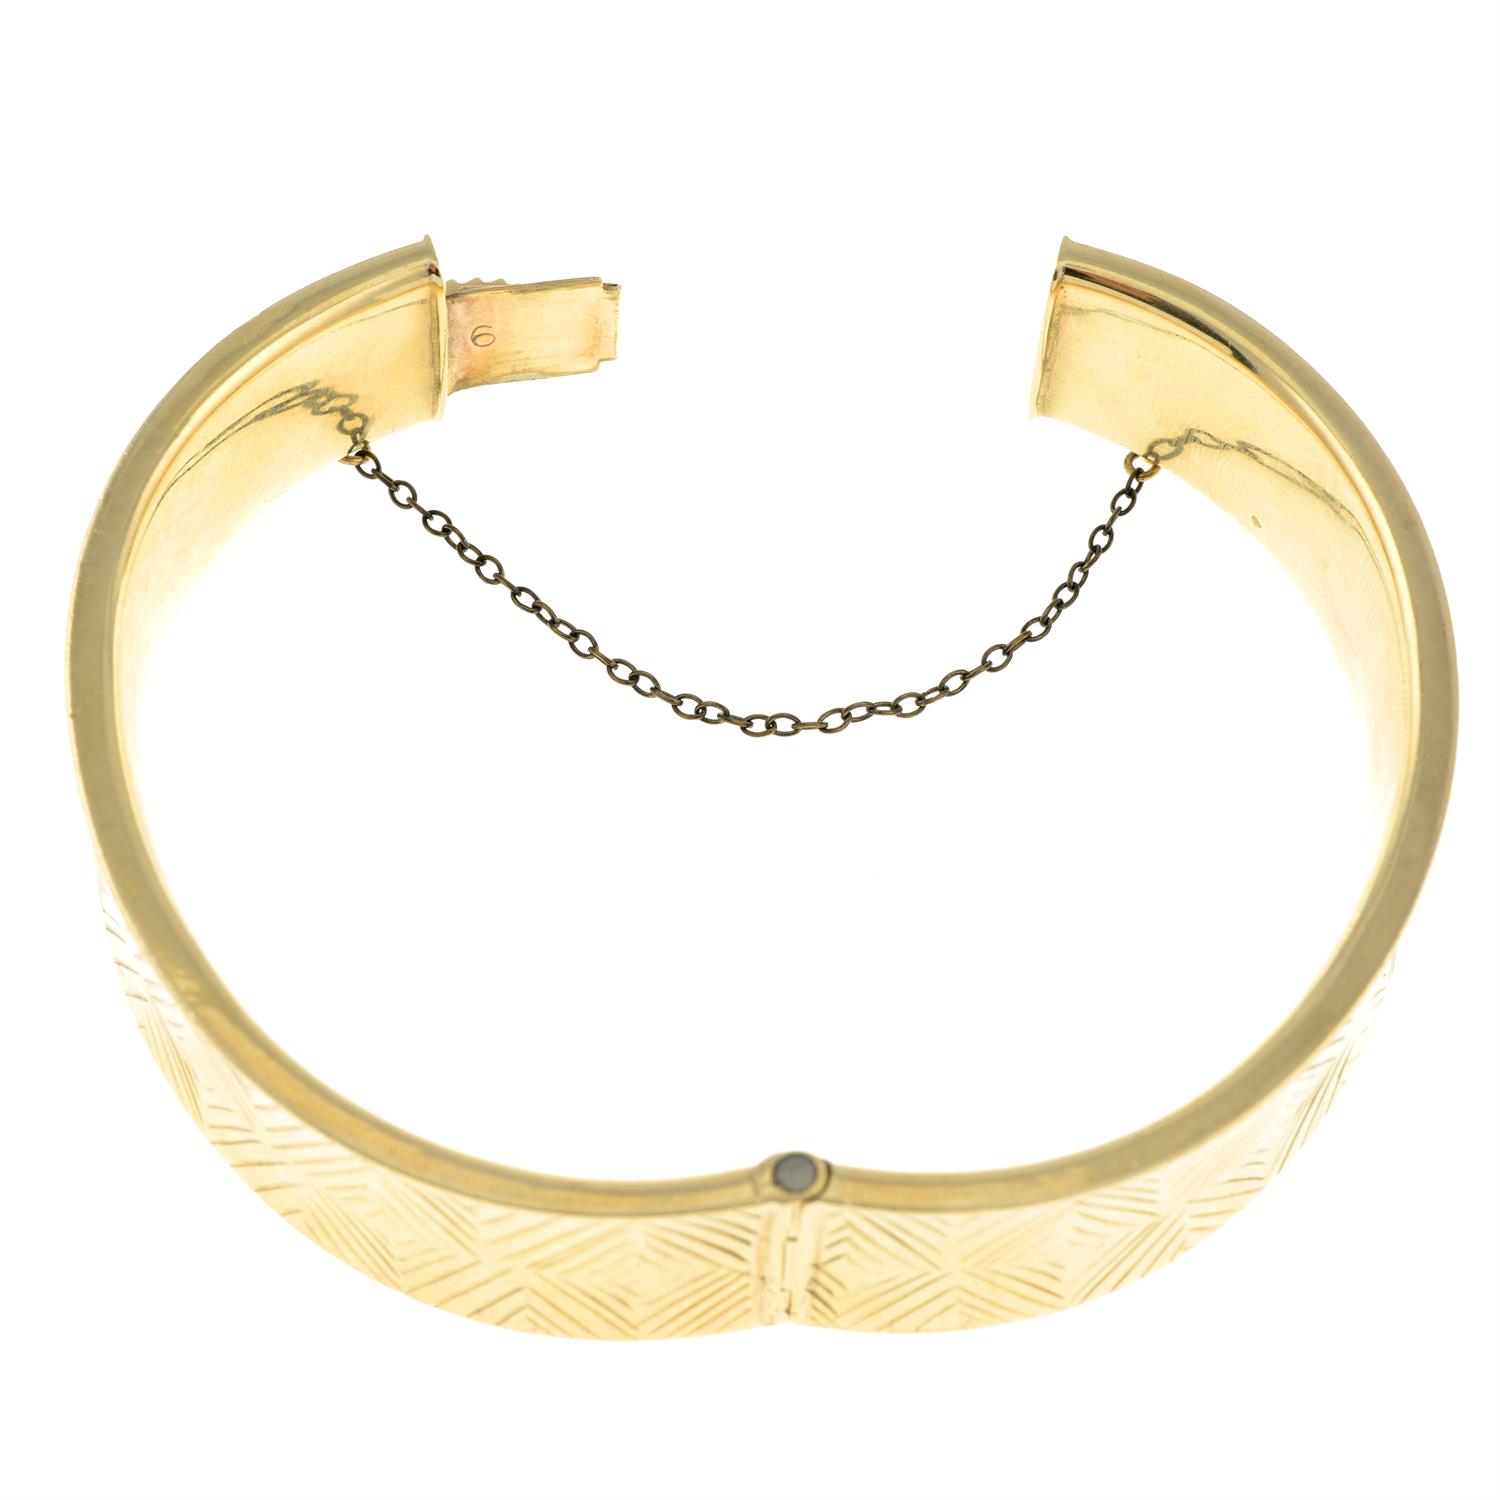 A 9ct gold hinged bangle, with cross motif. - Image 2 of 2